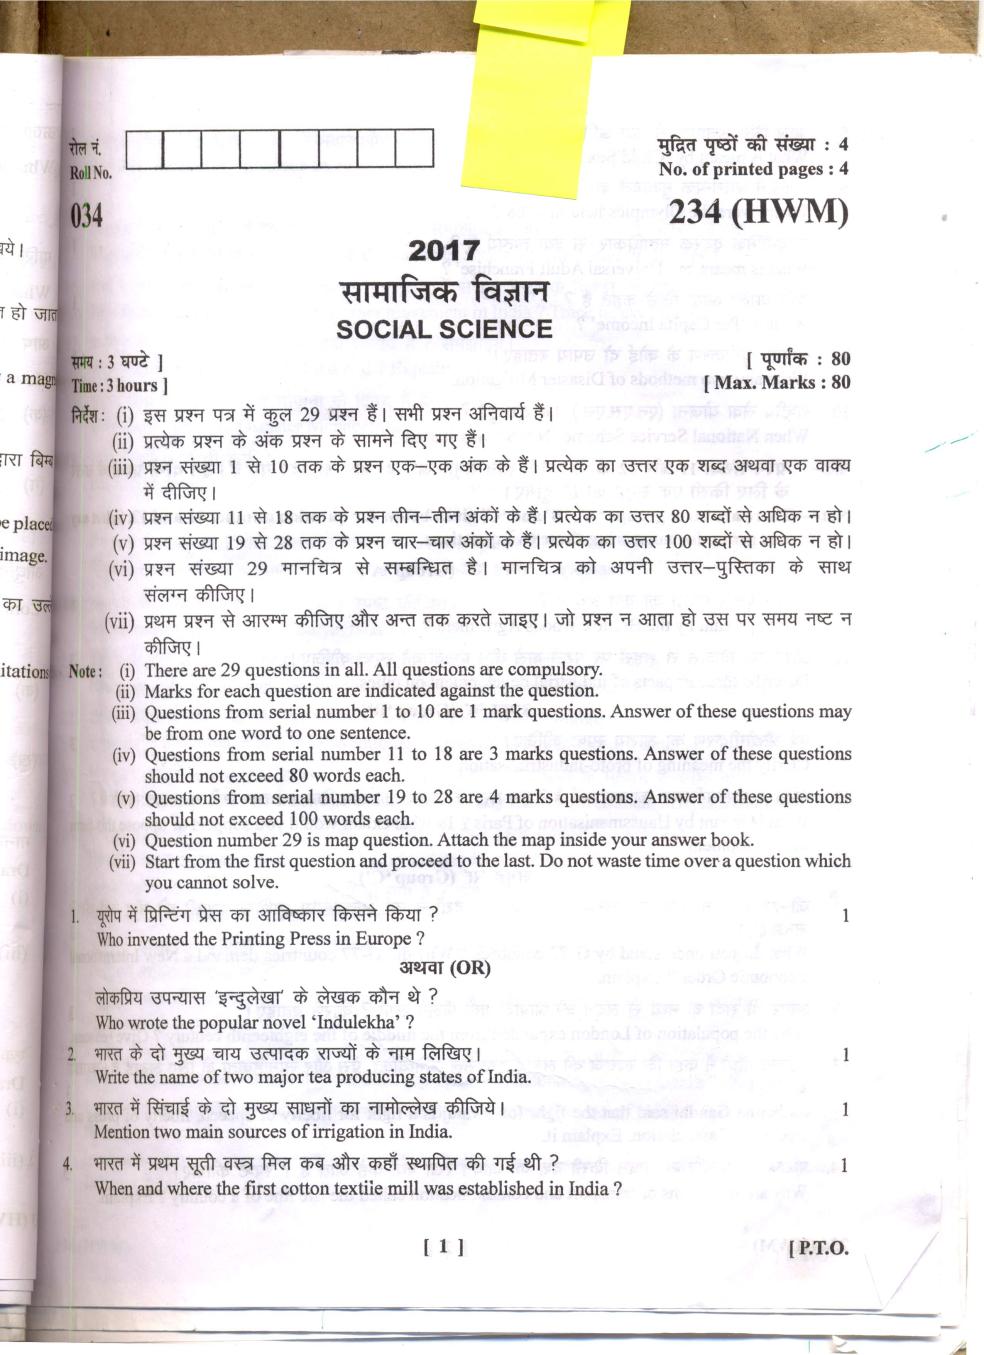 Uttarakhand Board Class 10 Question Paper 2017 for Social Science - Page 1